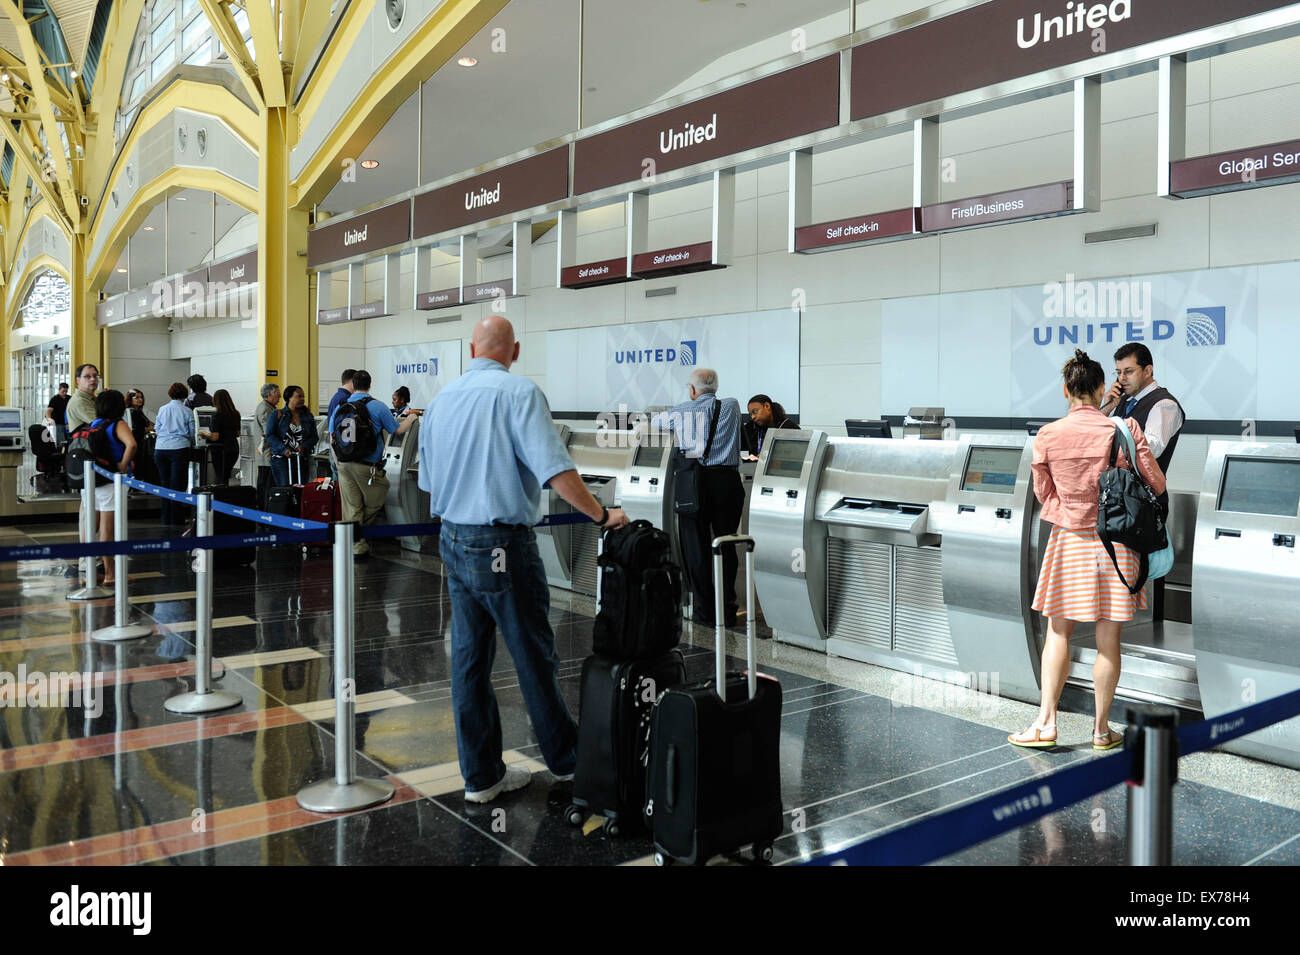 Washington, DC, USA. 8th July, 2015. People check in baggages with United Airlines at Ronald Reagan Washington National Airport in Washington, DC, the United States, on July 8, 2015. United Airlines (UA) resumed flights at all airports that had been grounded Wednesday morning for about two hours due to a computer glitch, according to the U.S. Federal Aviation Administration (FAA). Credit:  Bao Dandan/Xinhua/Alamy Live News Stock Photo